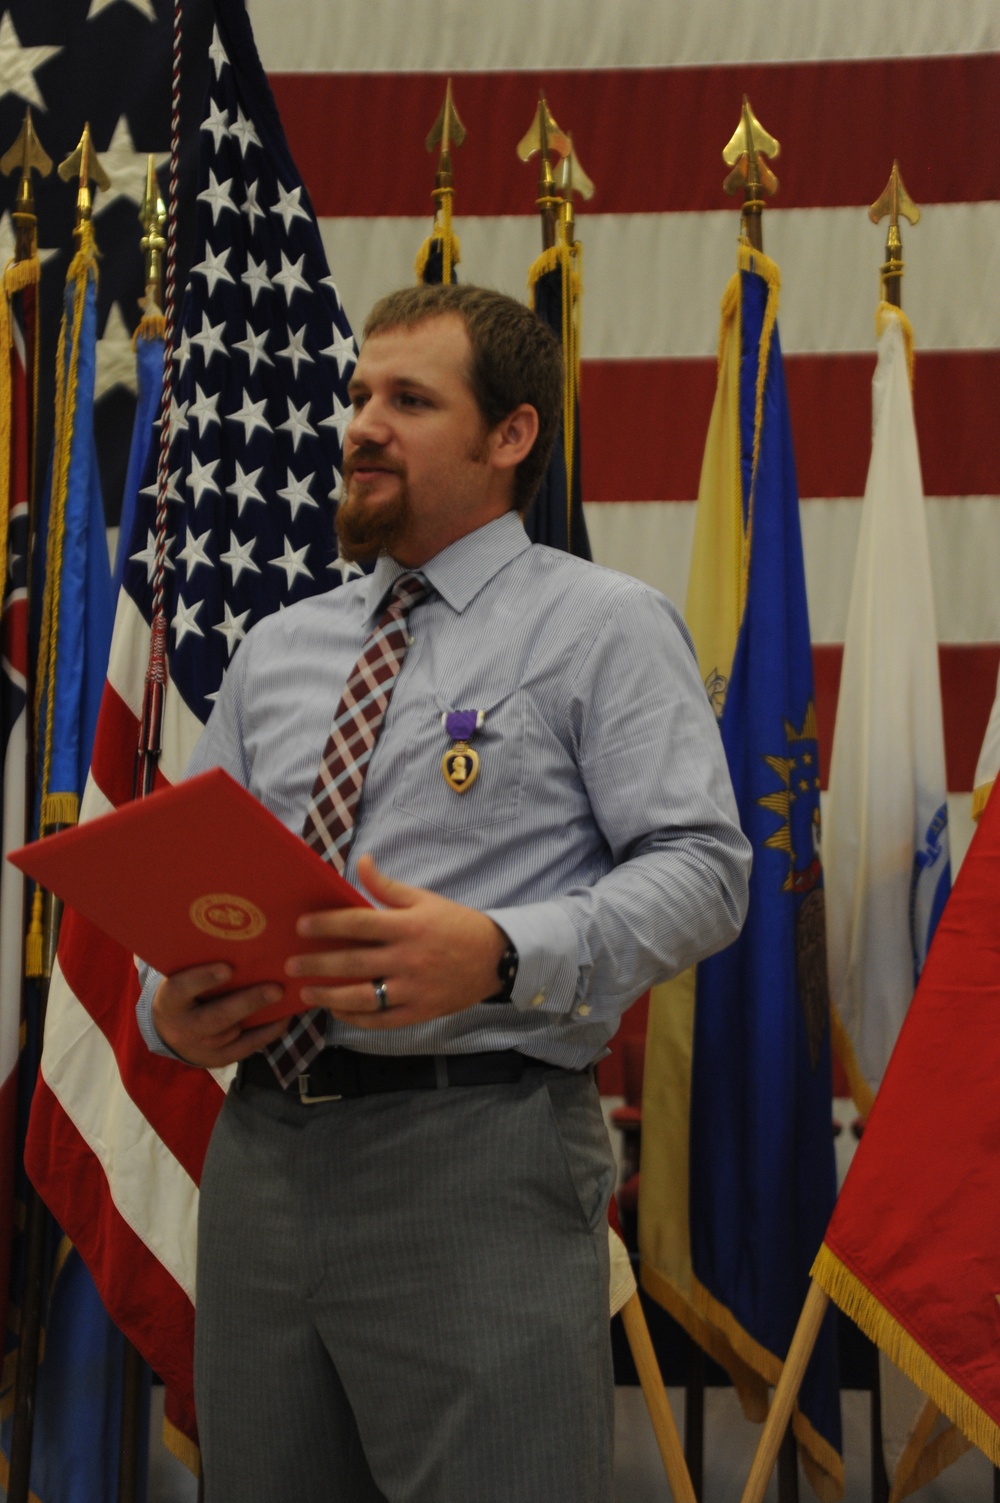 Marine Awarded Purple Heart after almost 10 years